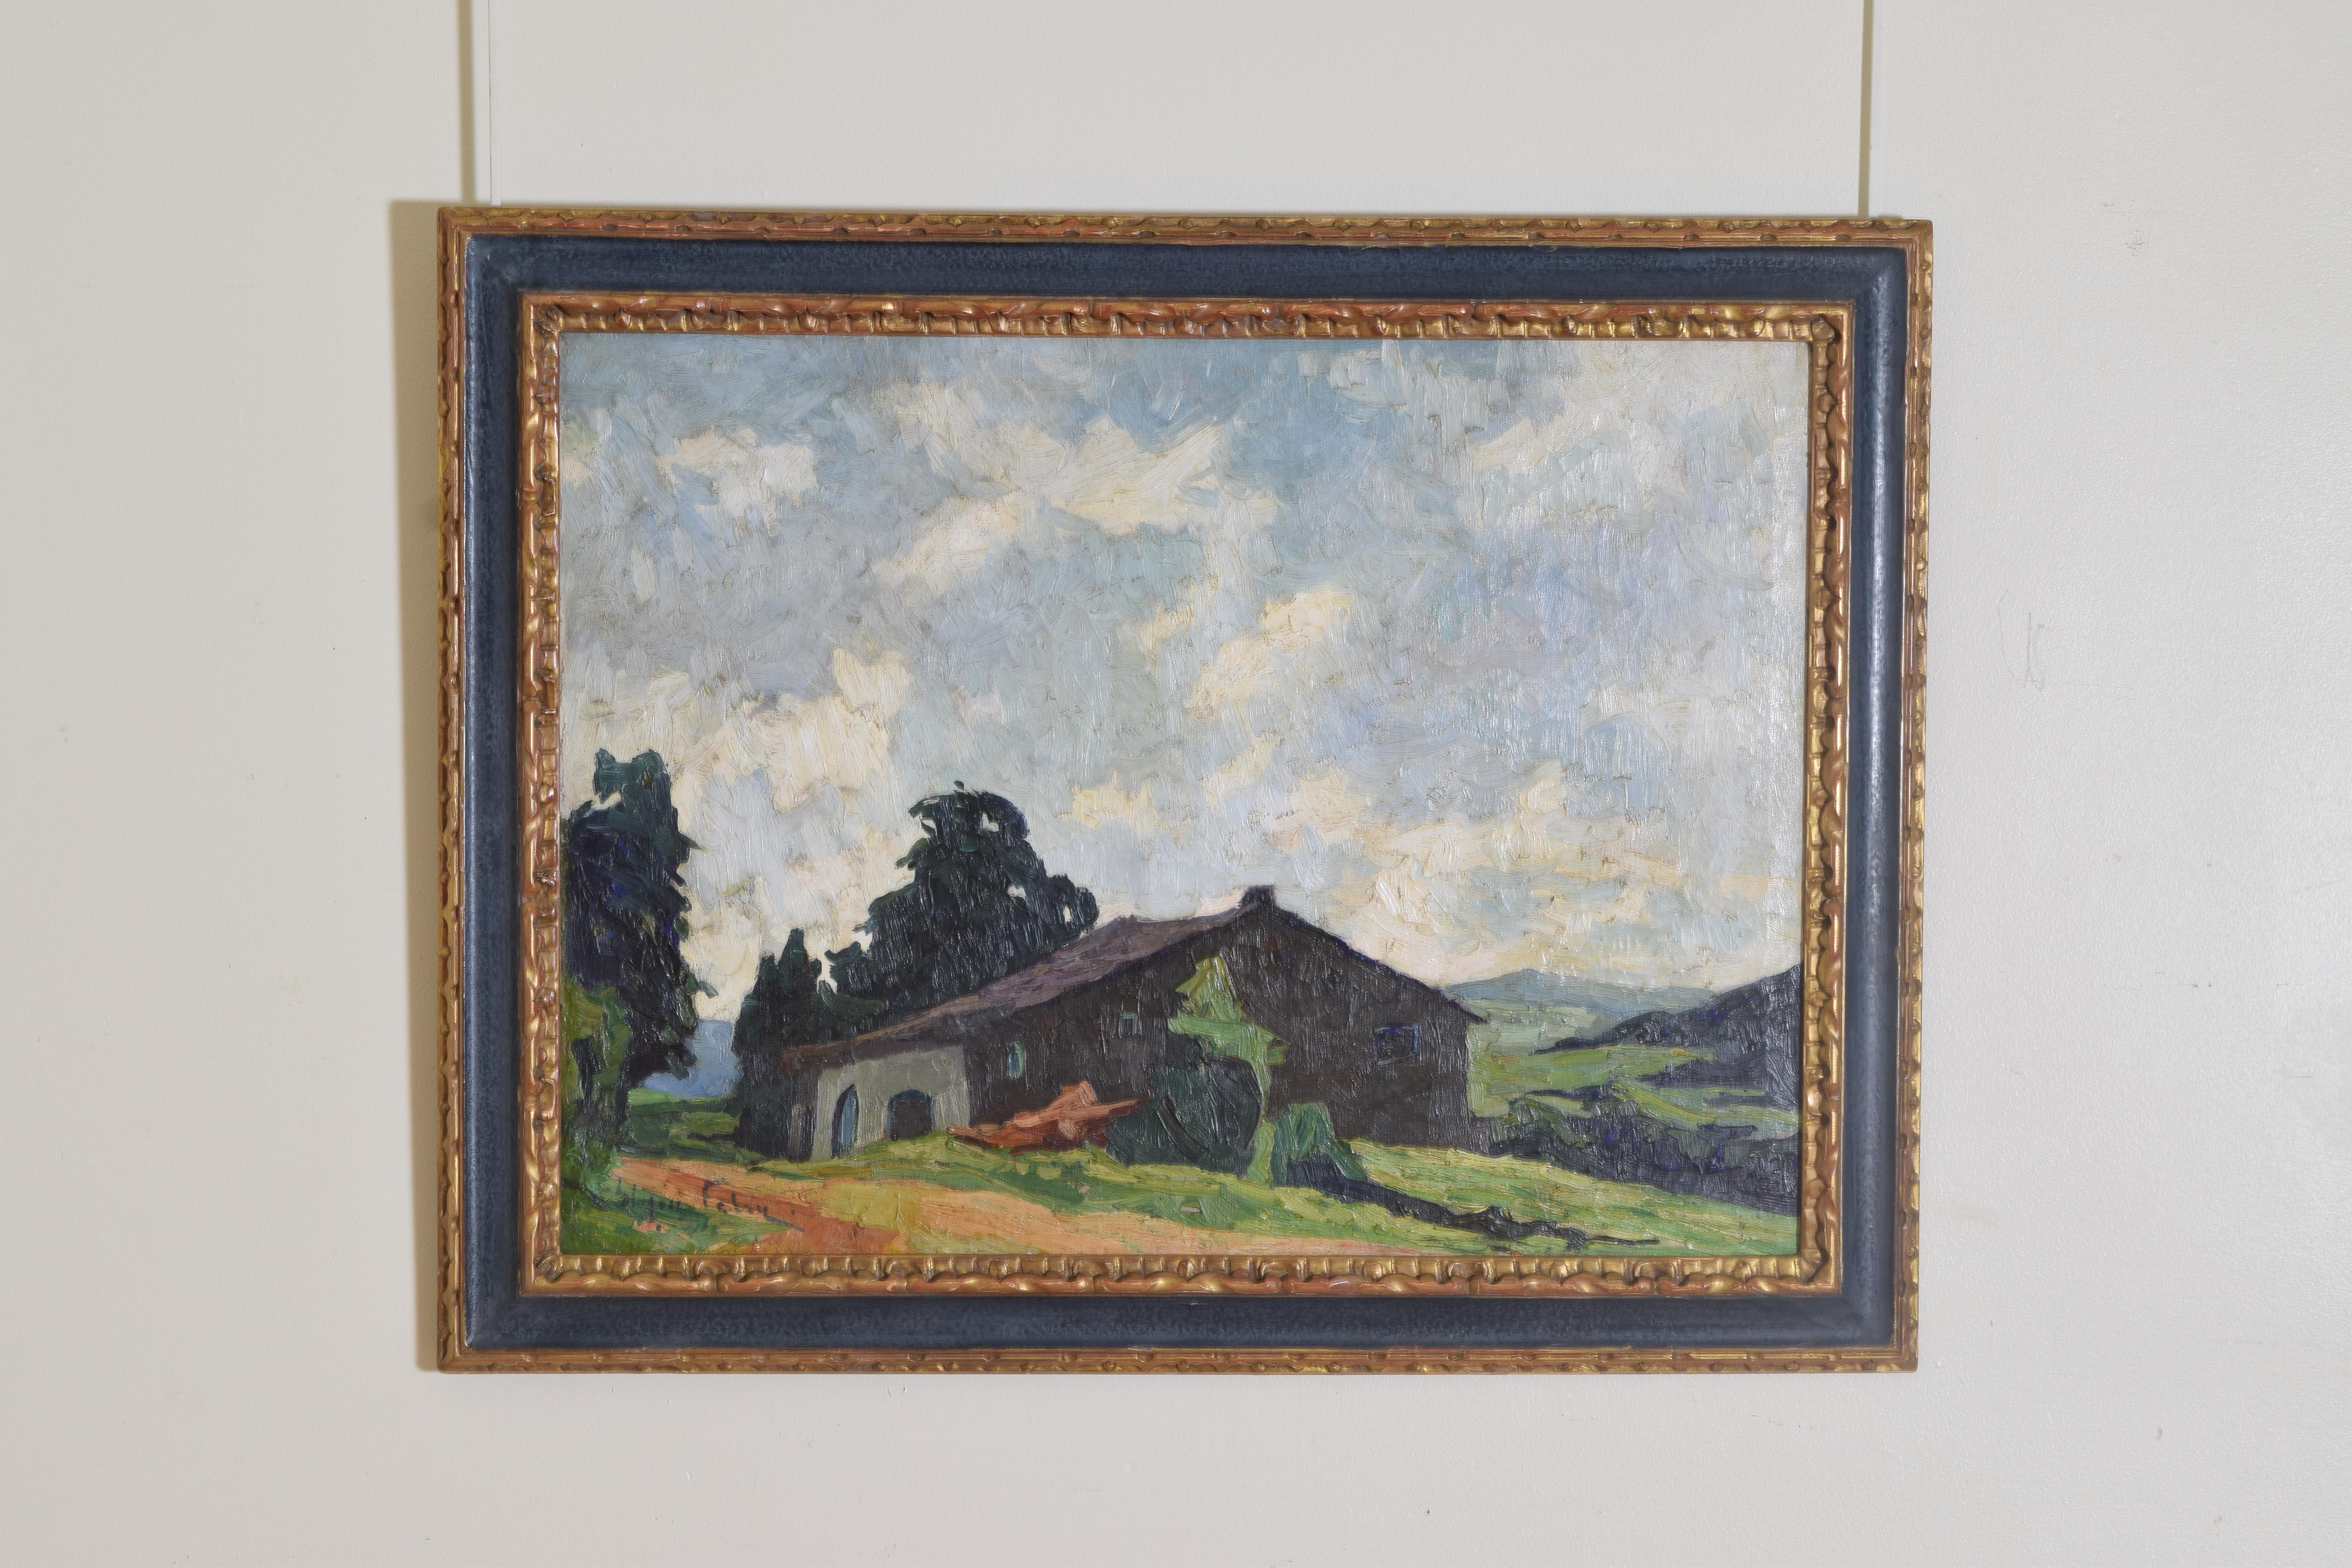 The oil on canvas depicting a farmhouse in an alpine meadow with mountains in the distance and pasture in the foreground, beautifully painted with a vast cloudy sky, retaining original giltwood and blue painted frame